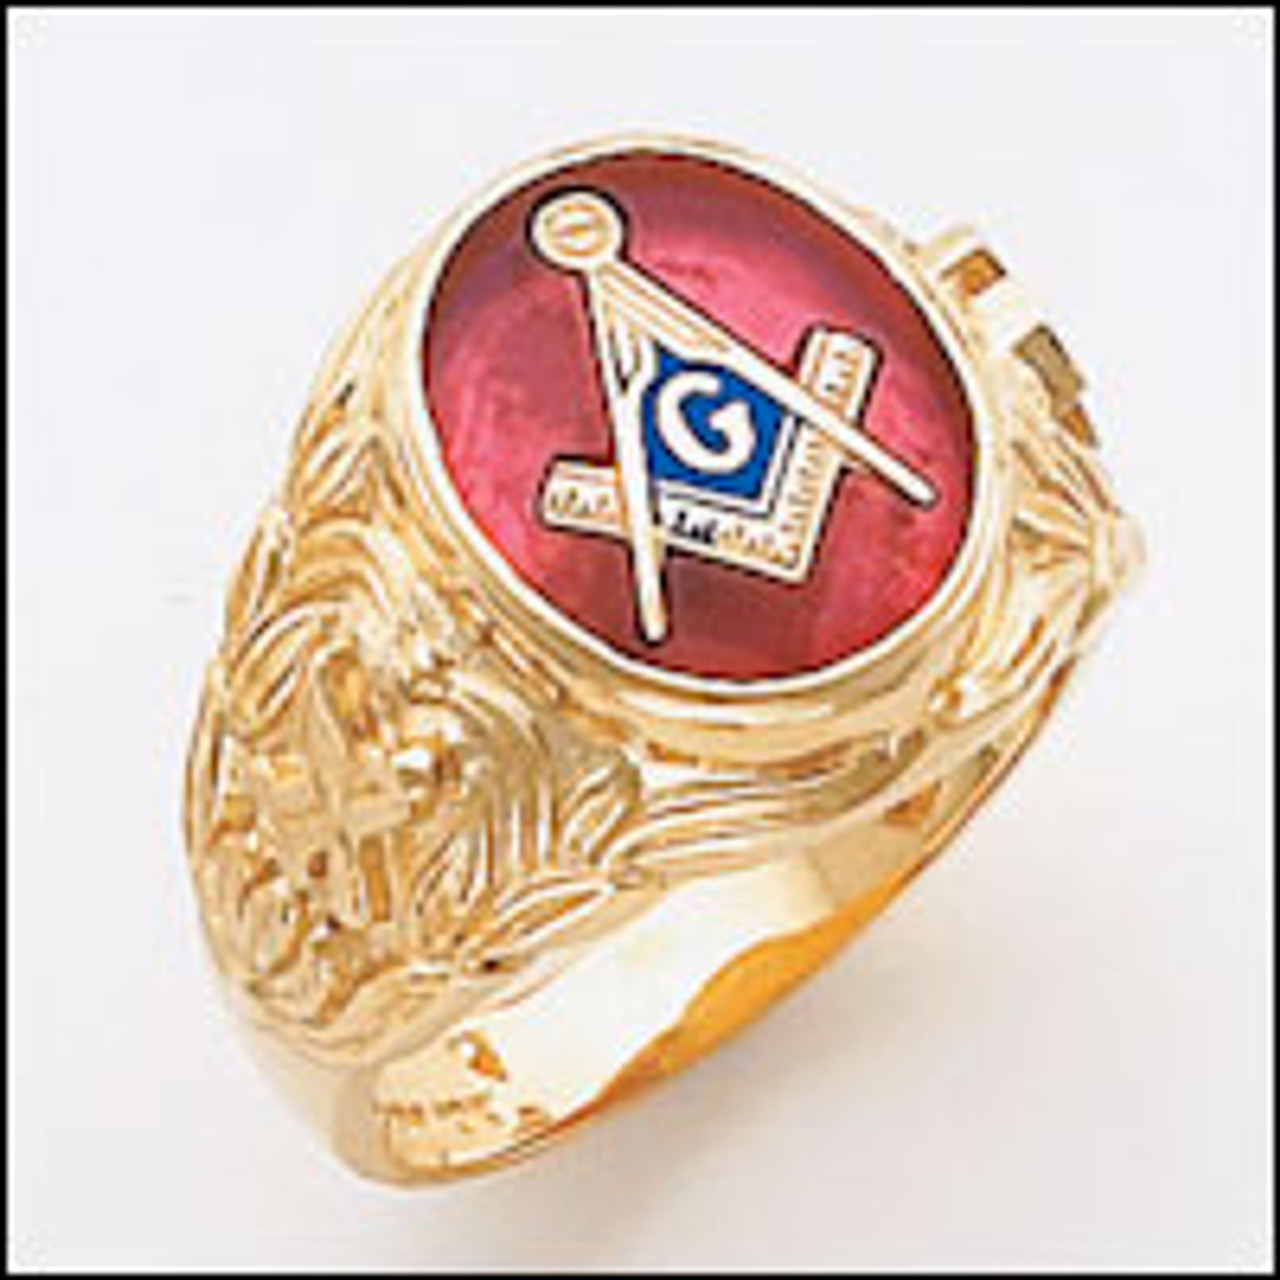 Master Mason College Ring Stainless Steel - FraternalTies